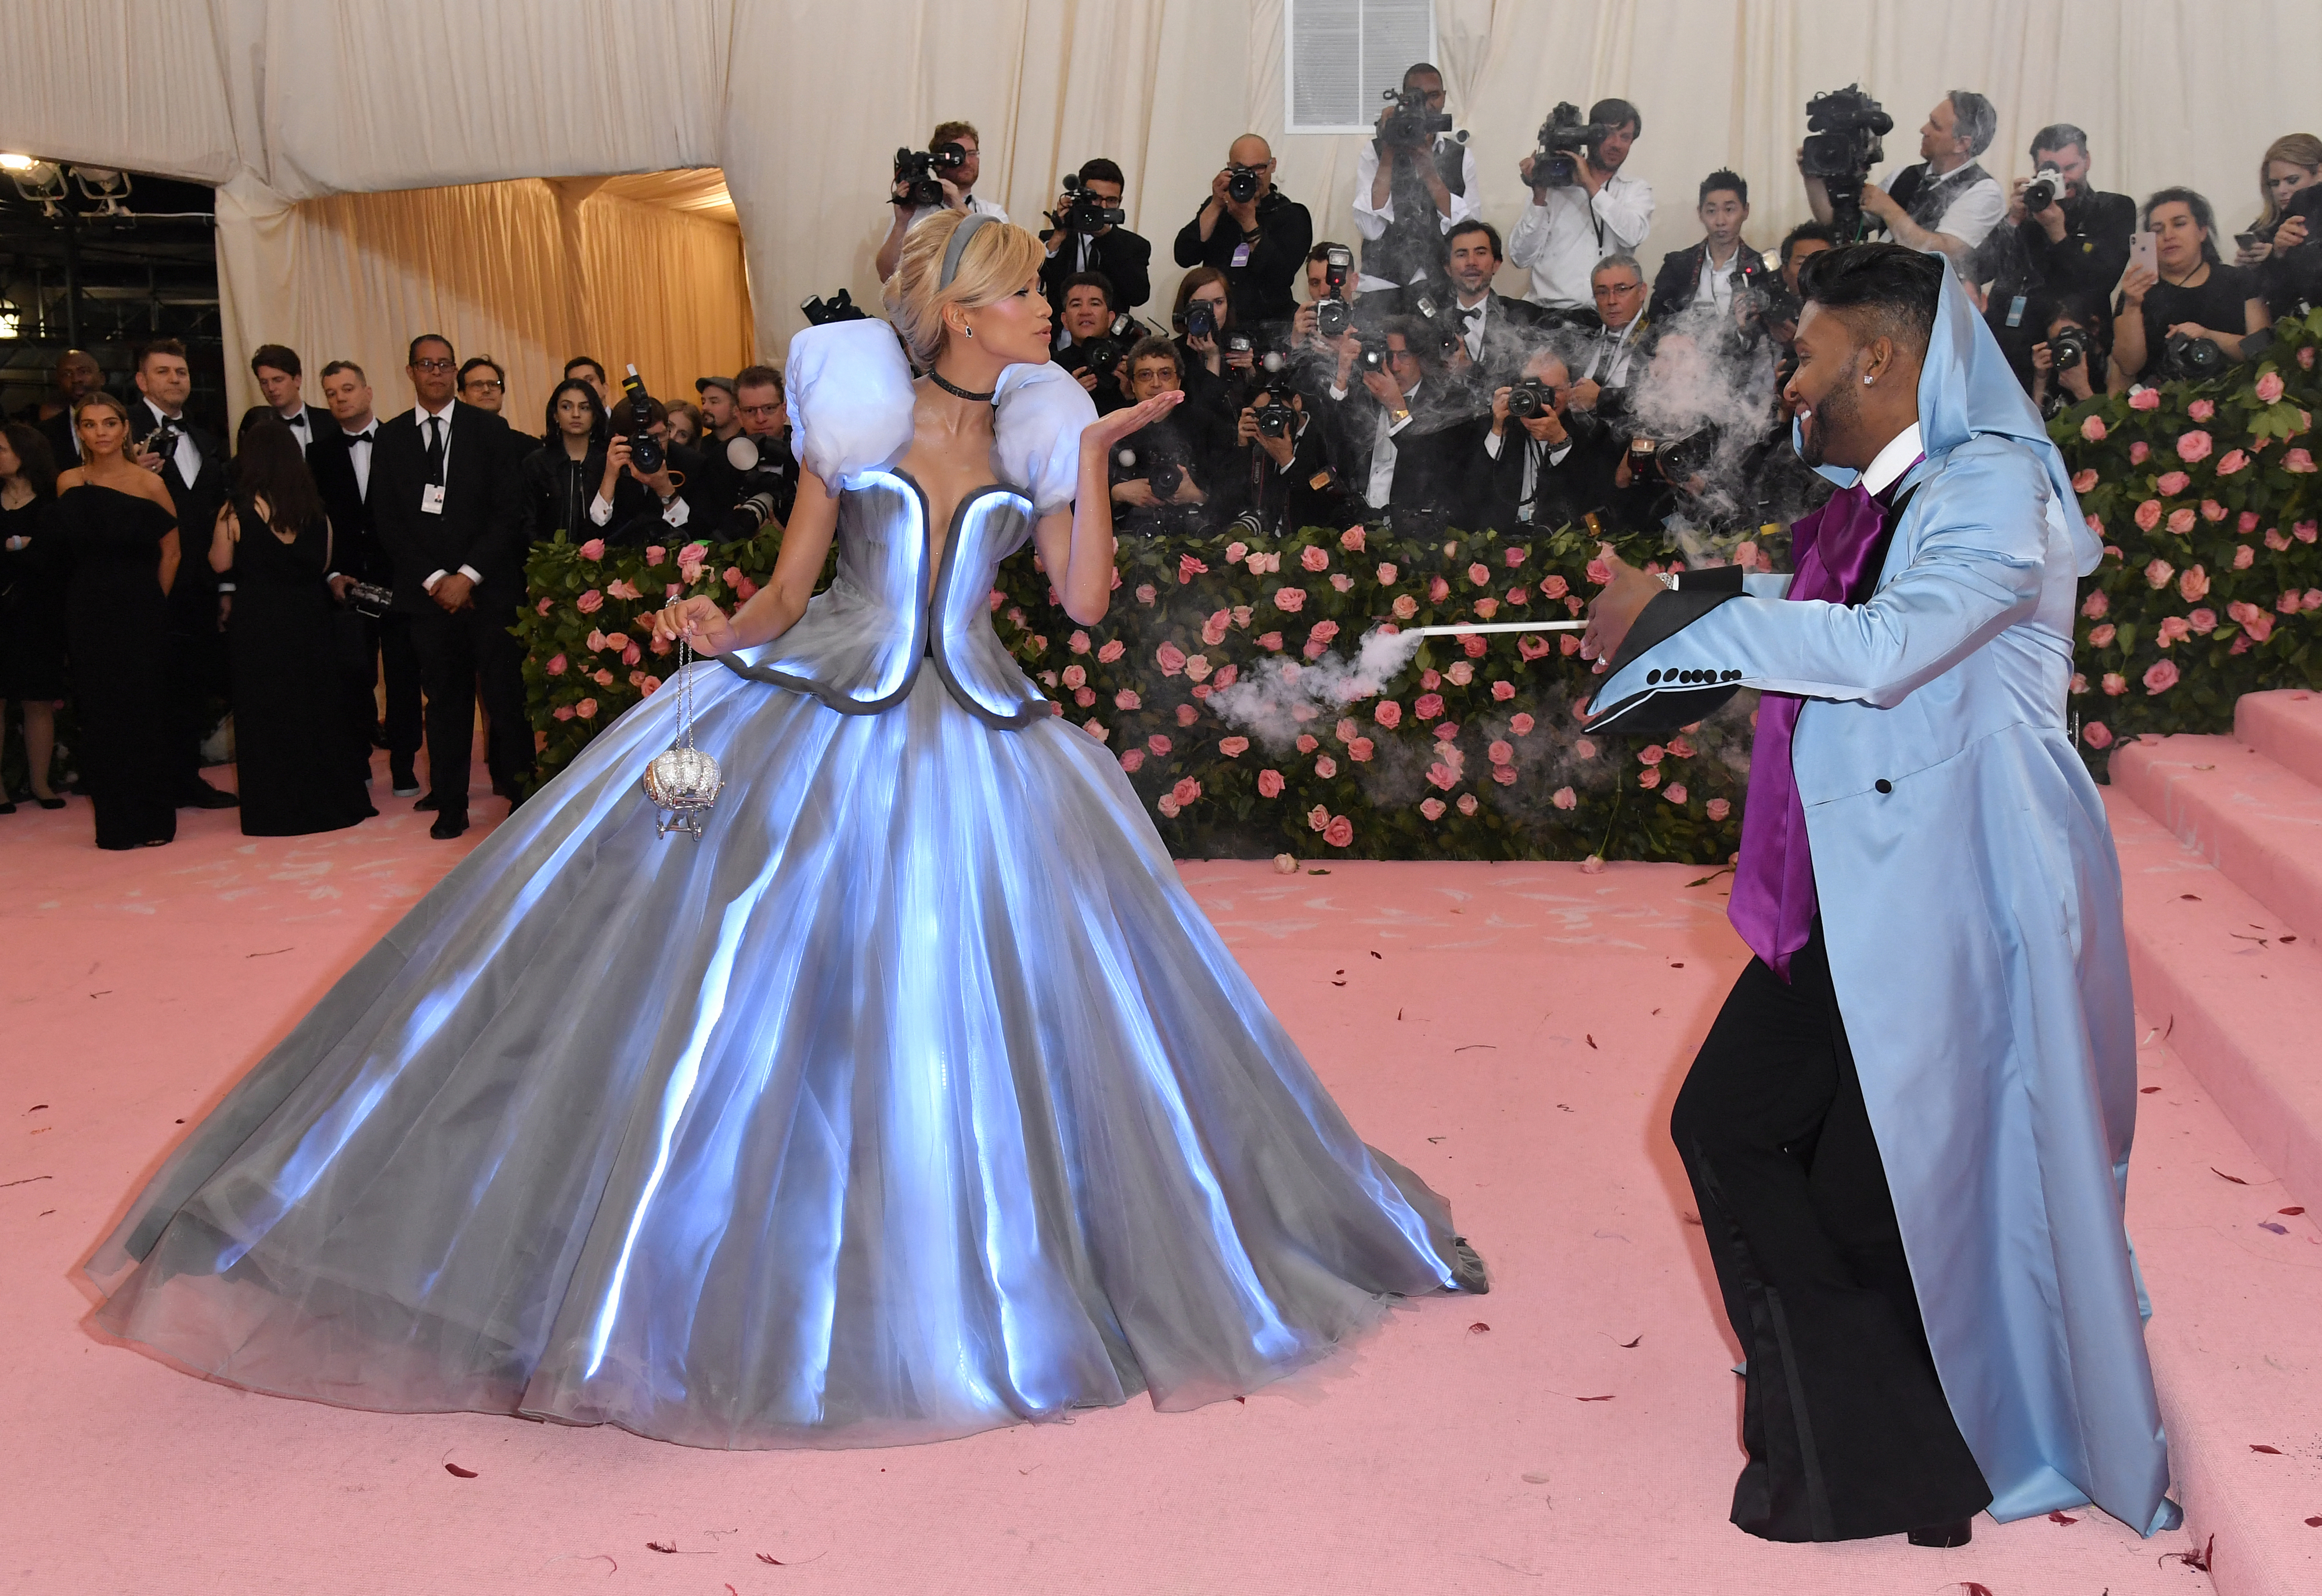 Zendaya in a silver gown with light-up feature and stylist Law Roach in a blue suit at a fashion event